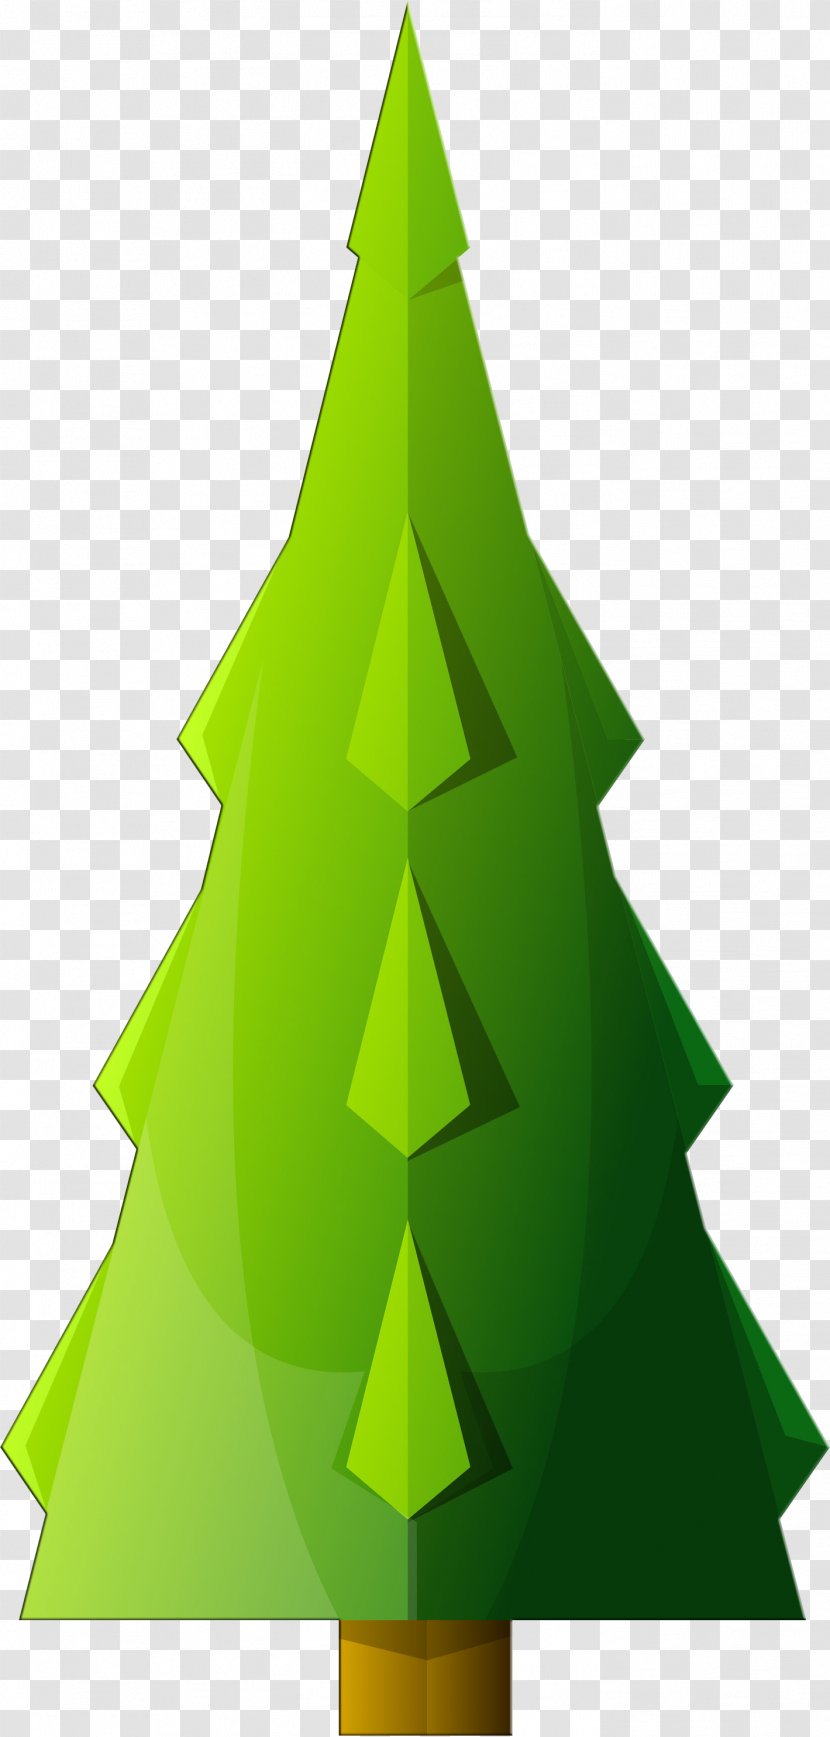 Paper Christmas Tree Origami Step By Ornament - Fir-tree Transparent PNG